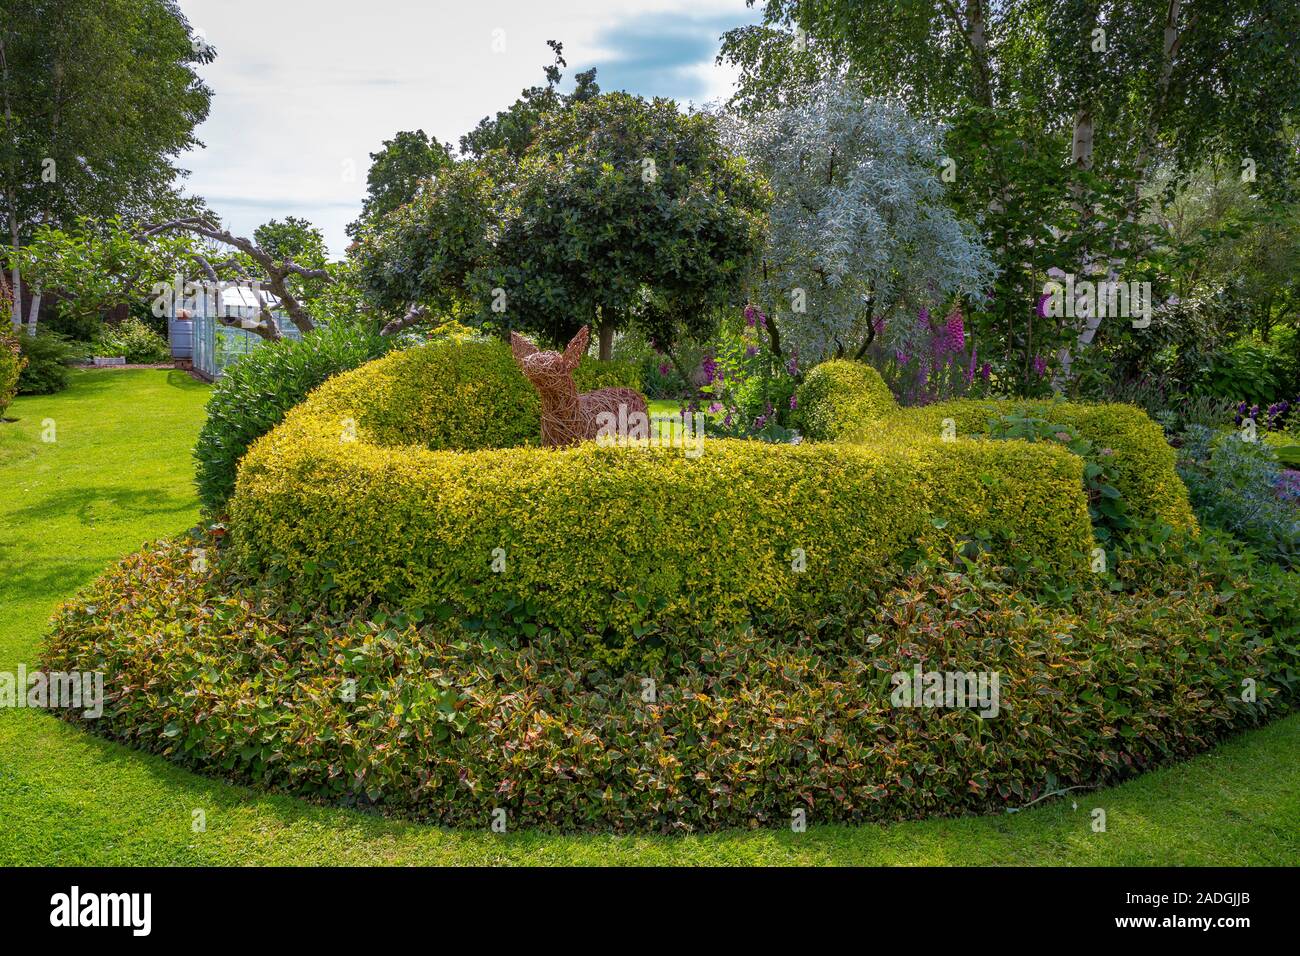 Buxus sempervirens topiary with willow deer sculpture, underplanted with Houttuynia cordata 'Chameleon' Stock Photo